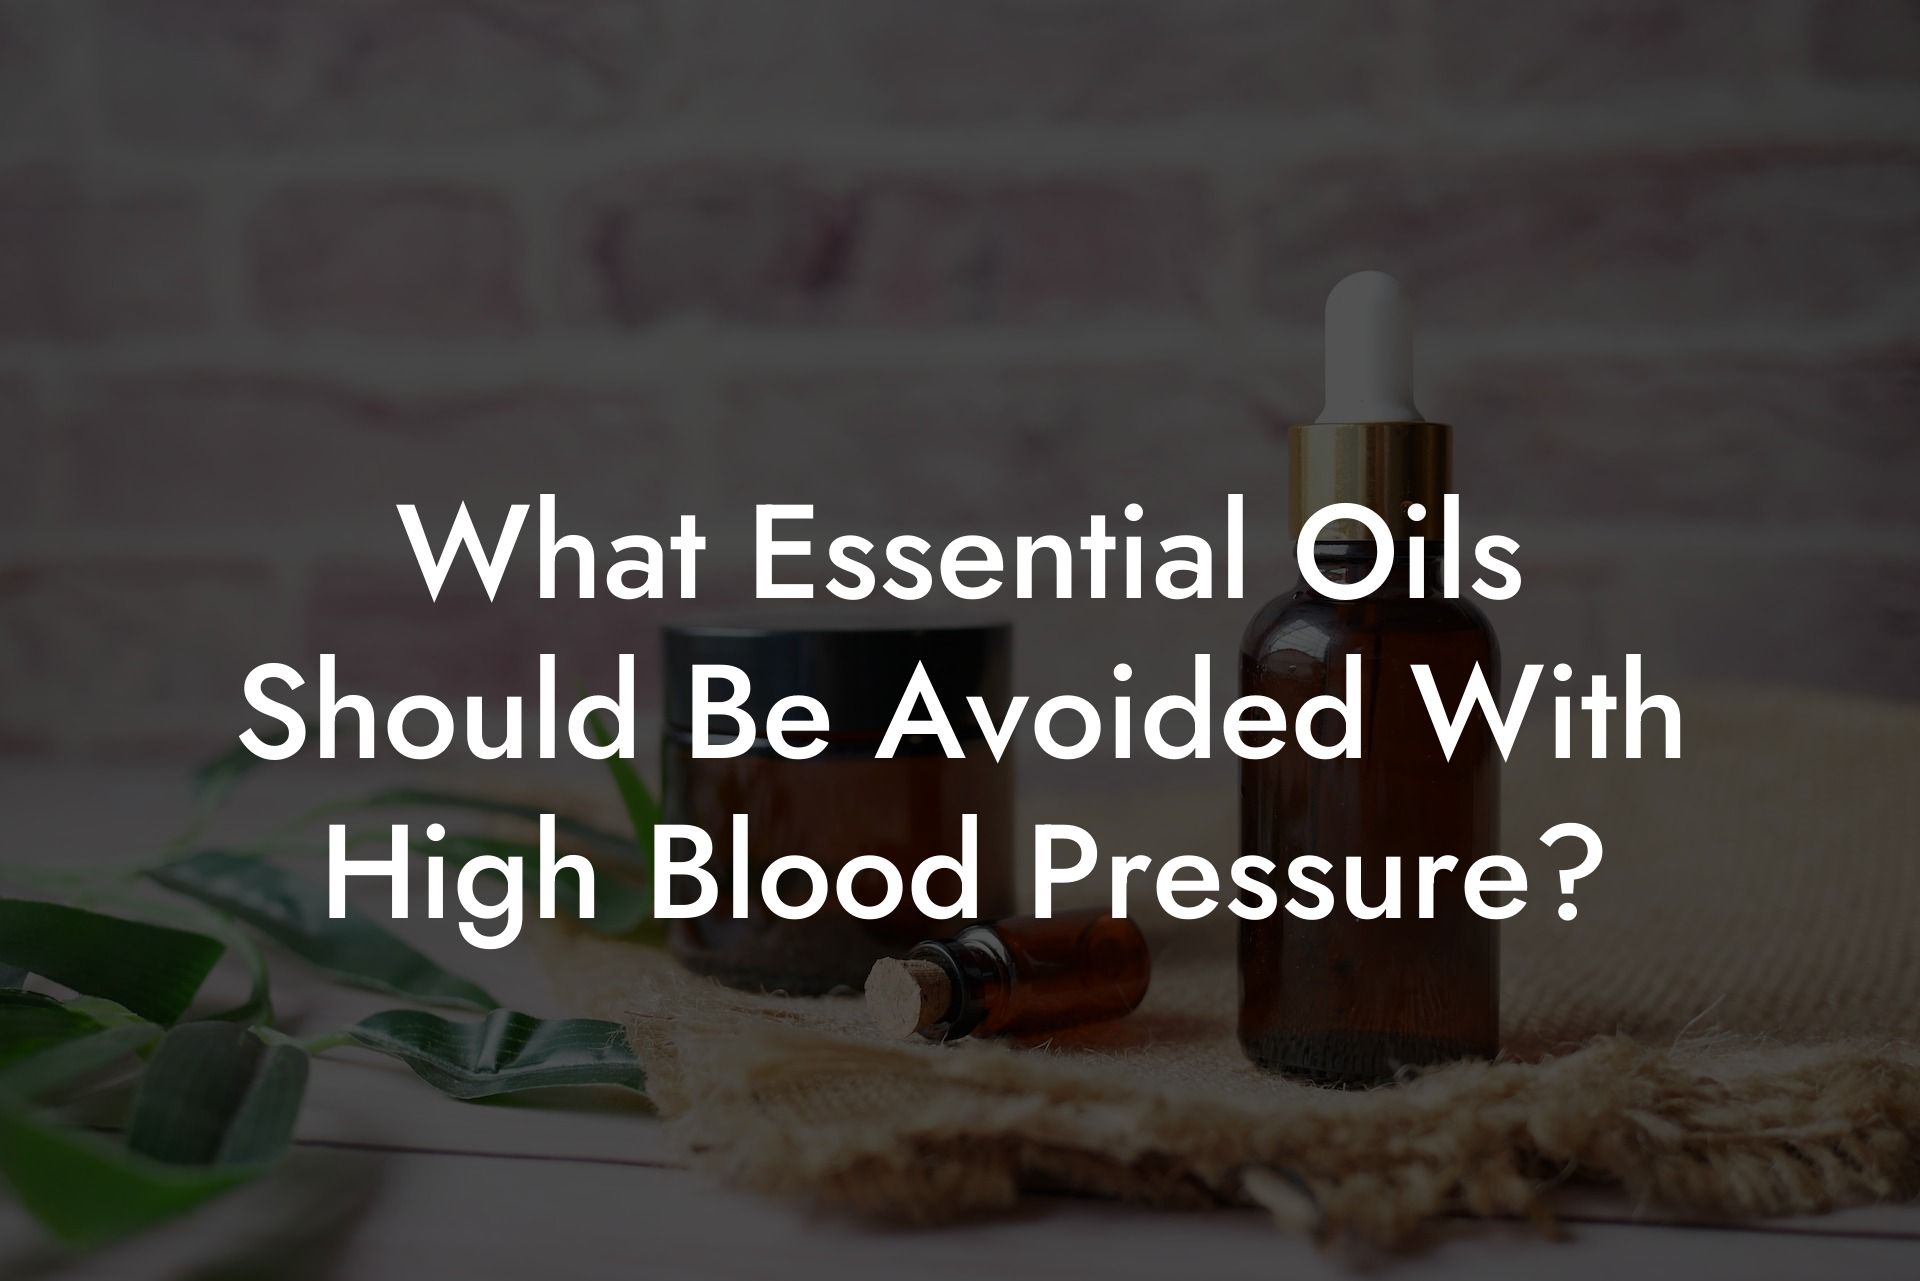 What Essential Oils Should Be Avoided With High Blood Pressure?